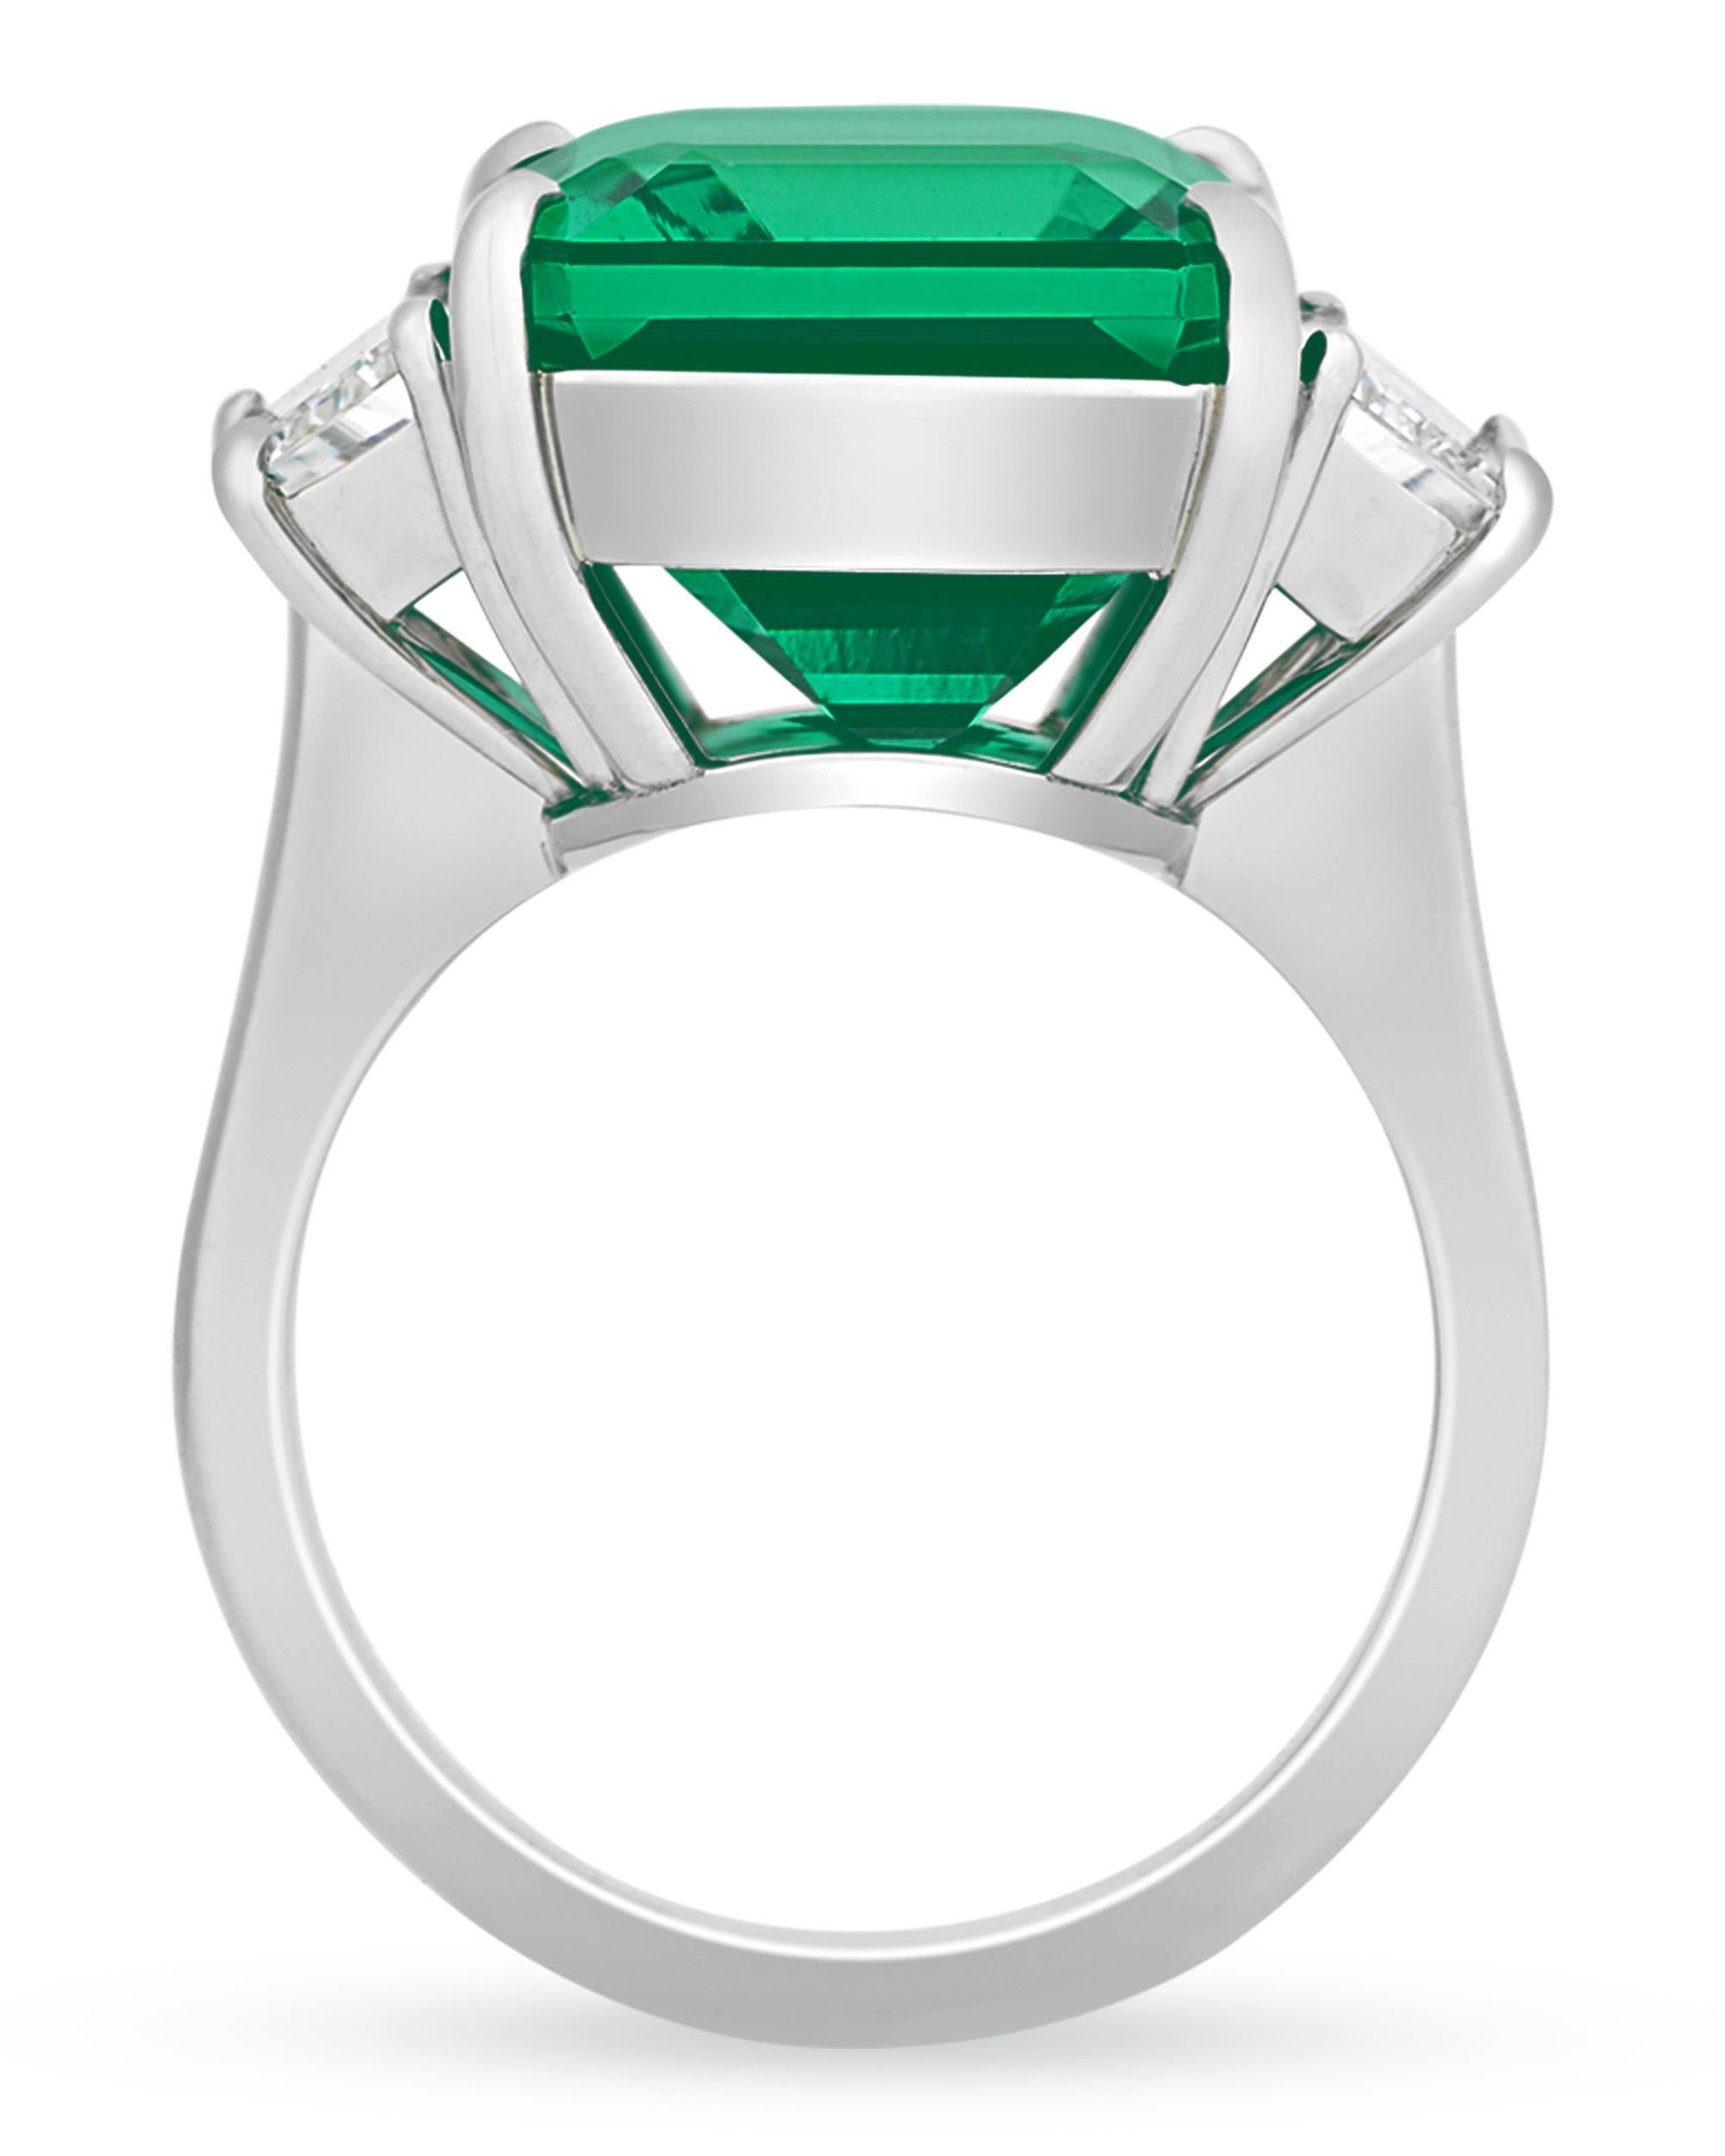 Displaying a striking vivid green color, a 12.47-carat octagonal step-cut emerald lies at the center of this distinctive ring. This gemstone is certified by GemResearch Swisslabs and C. Dunaigre as being Zambian in origin. Zambian emerald mines are